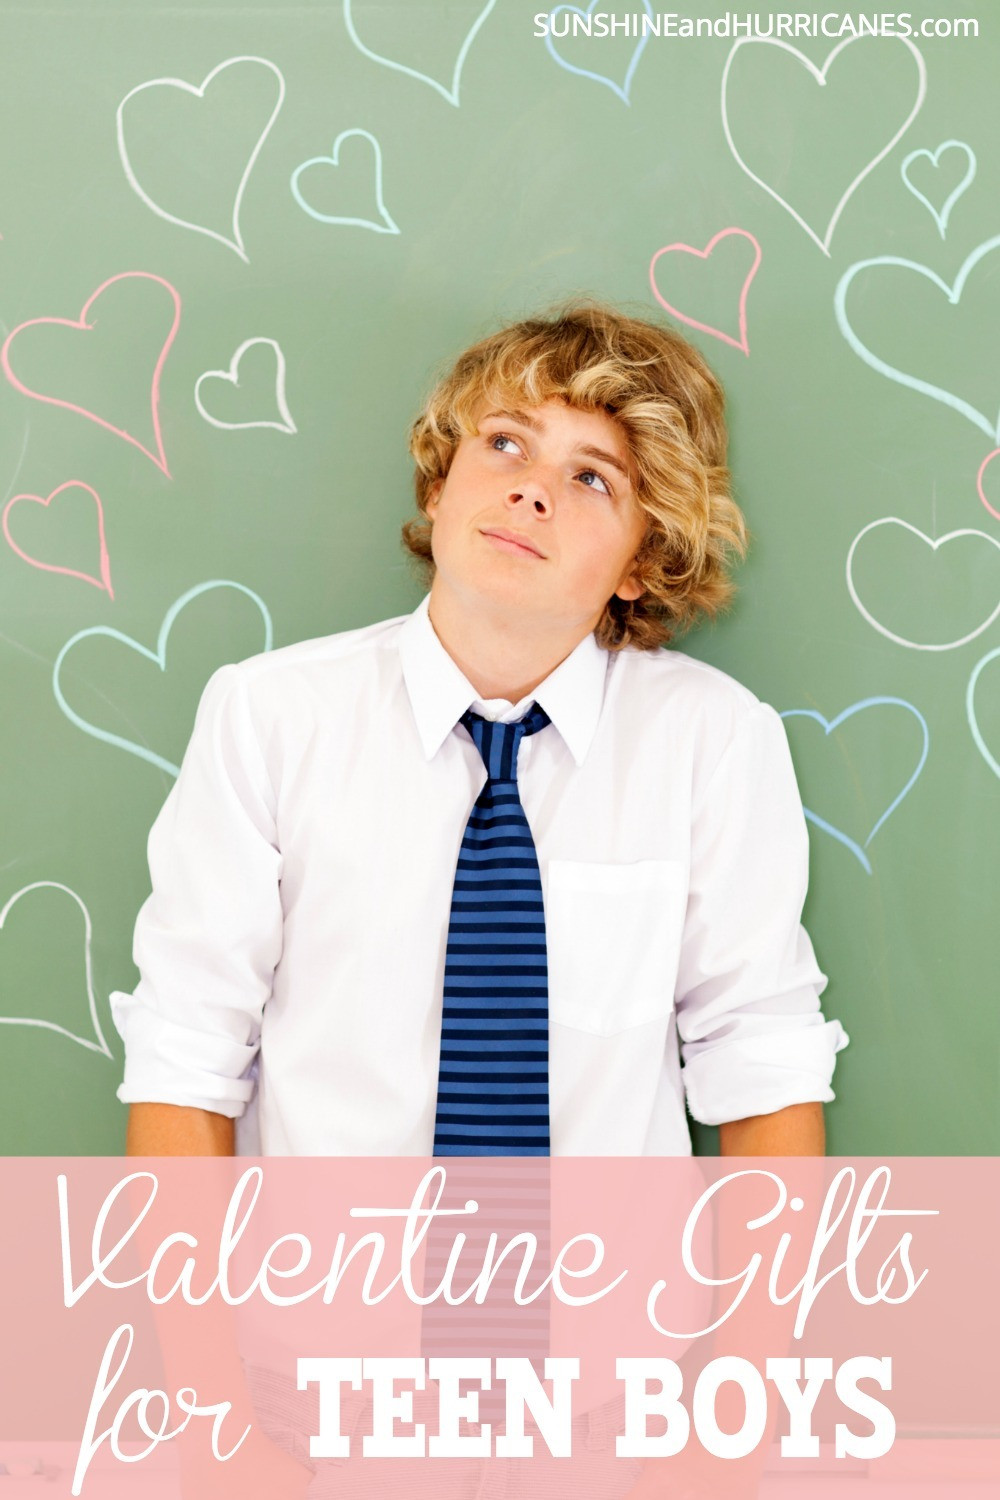 Valentine Gift Ideas For Teenage Guys
 Valentine Gifts for Teen Boys Tons of Ideas from Sweet